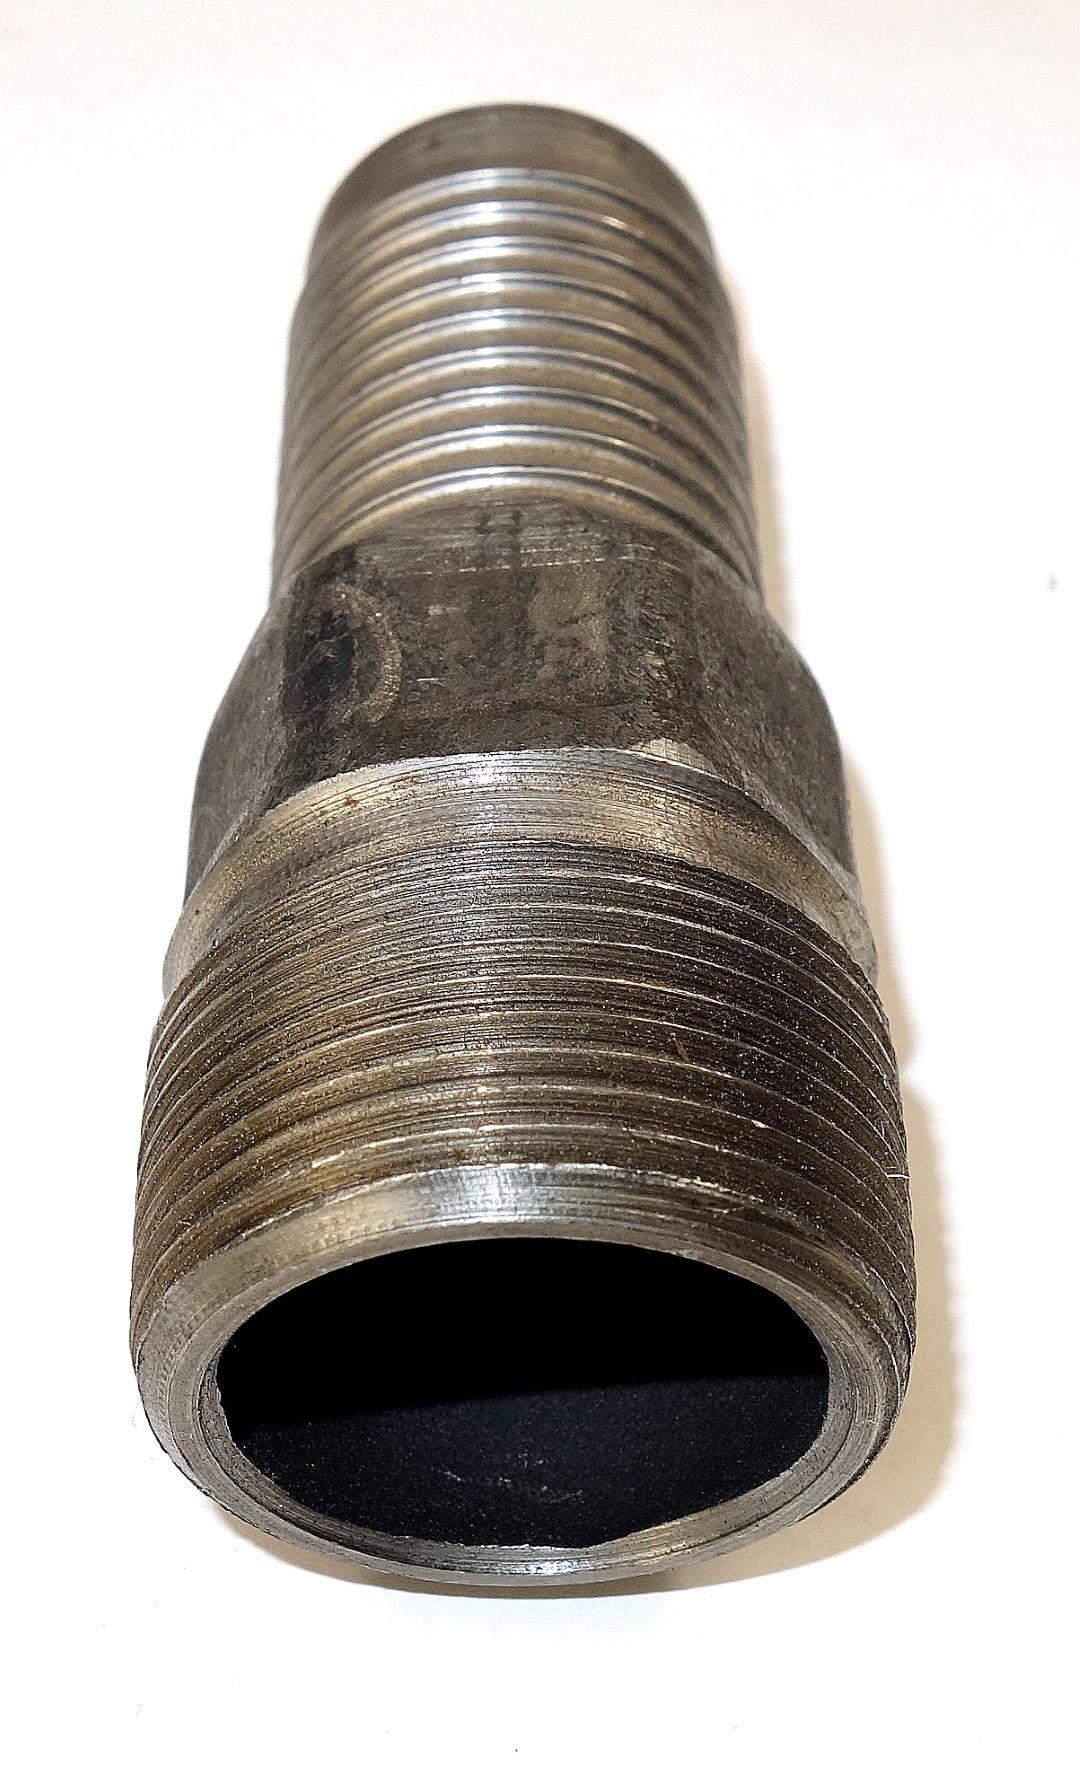 M9-6142 | 4730-01-125-2071 Hydraulic Fluid Reservoir Filter Pipe Nozzle for M916 and M920 NOS (5).jpg